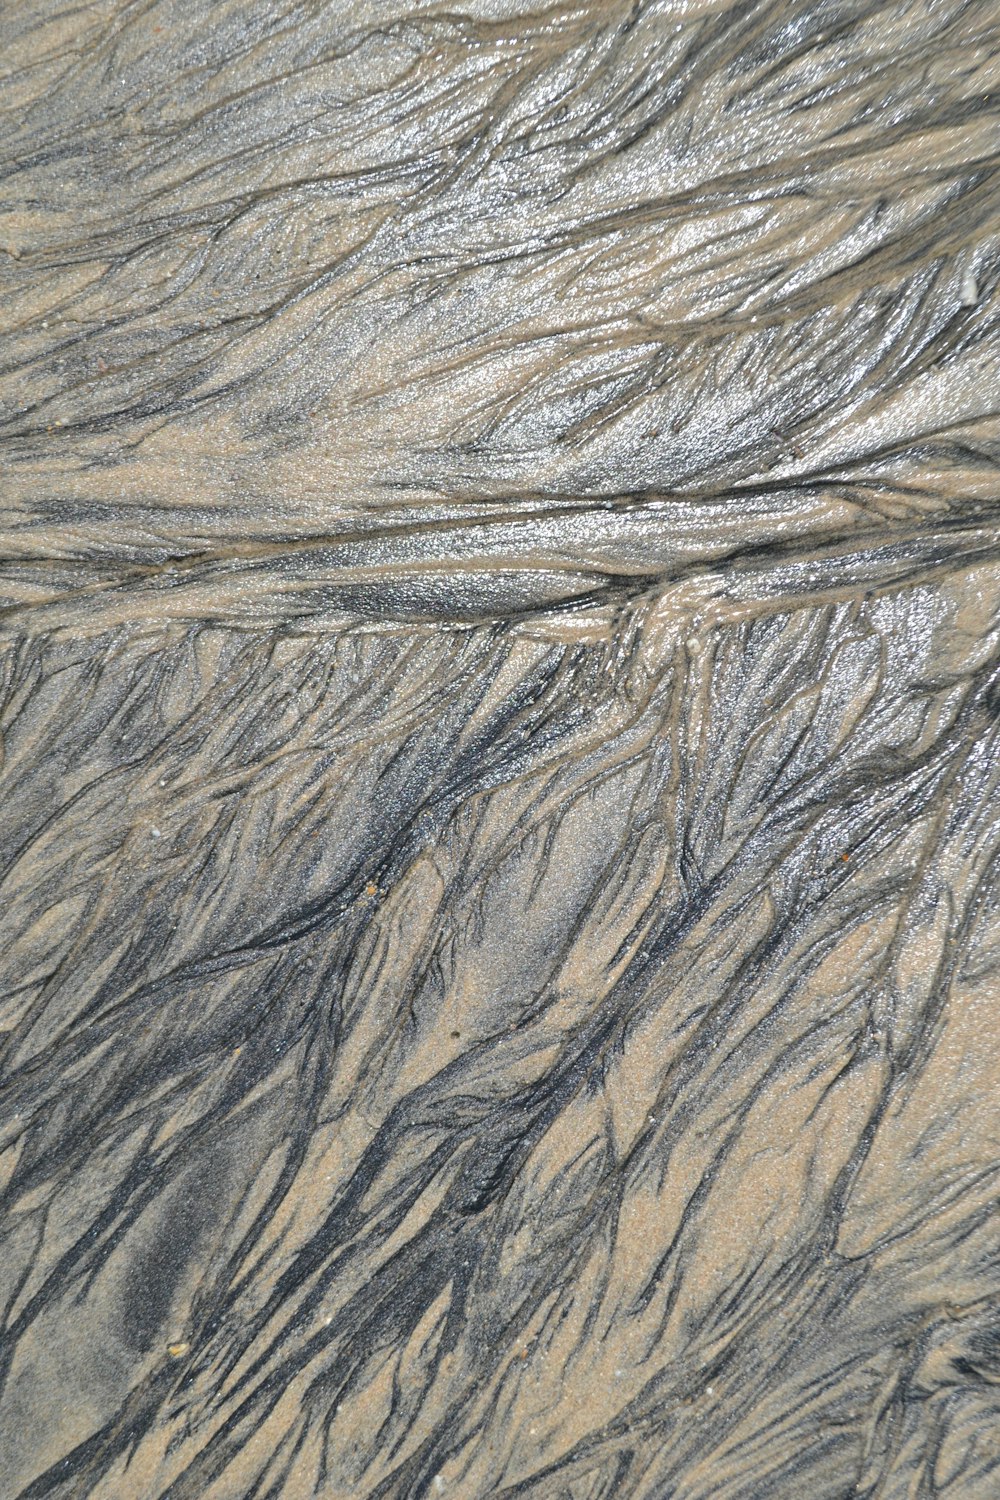 a close up view of the sand and water